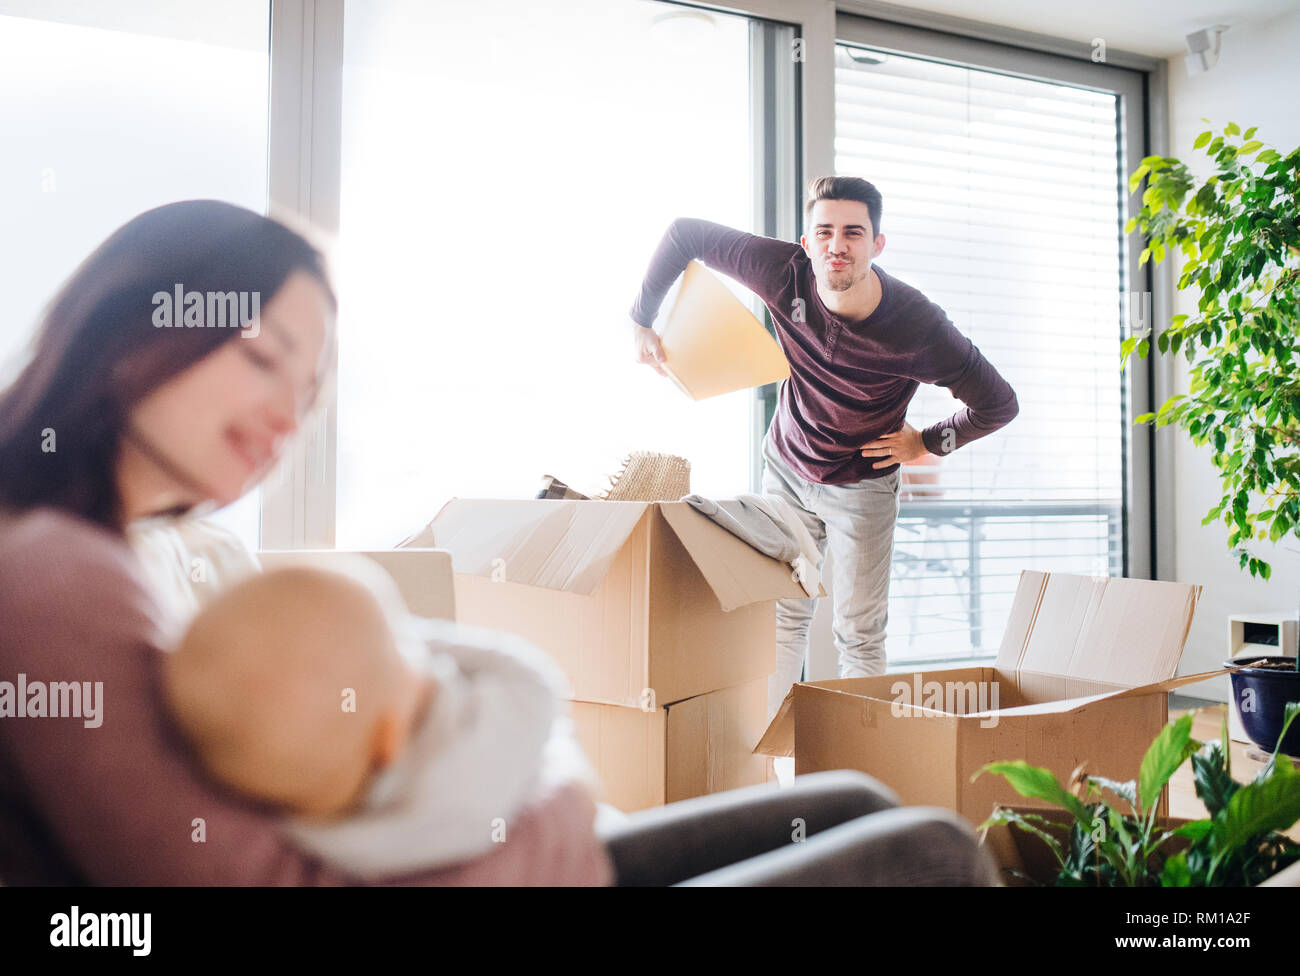 A portrait of young couple with a baby and cardboard boxes moving in a new home. Stock Photo